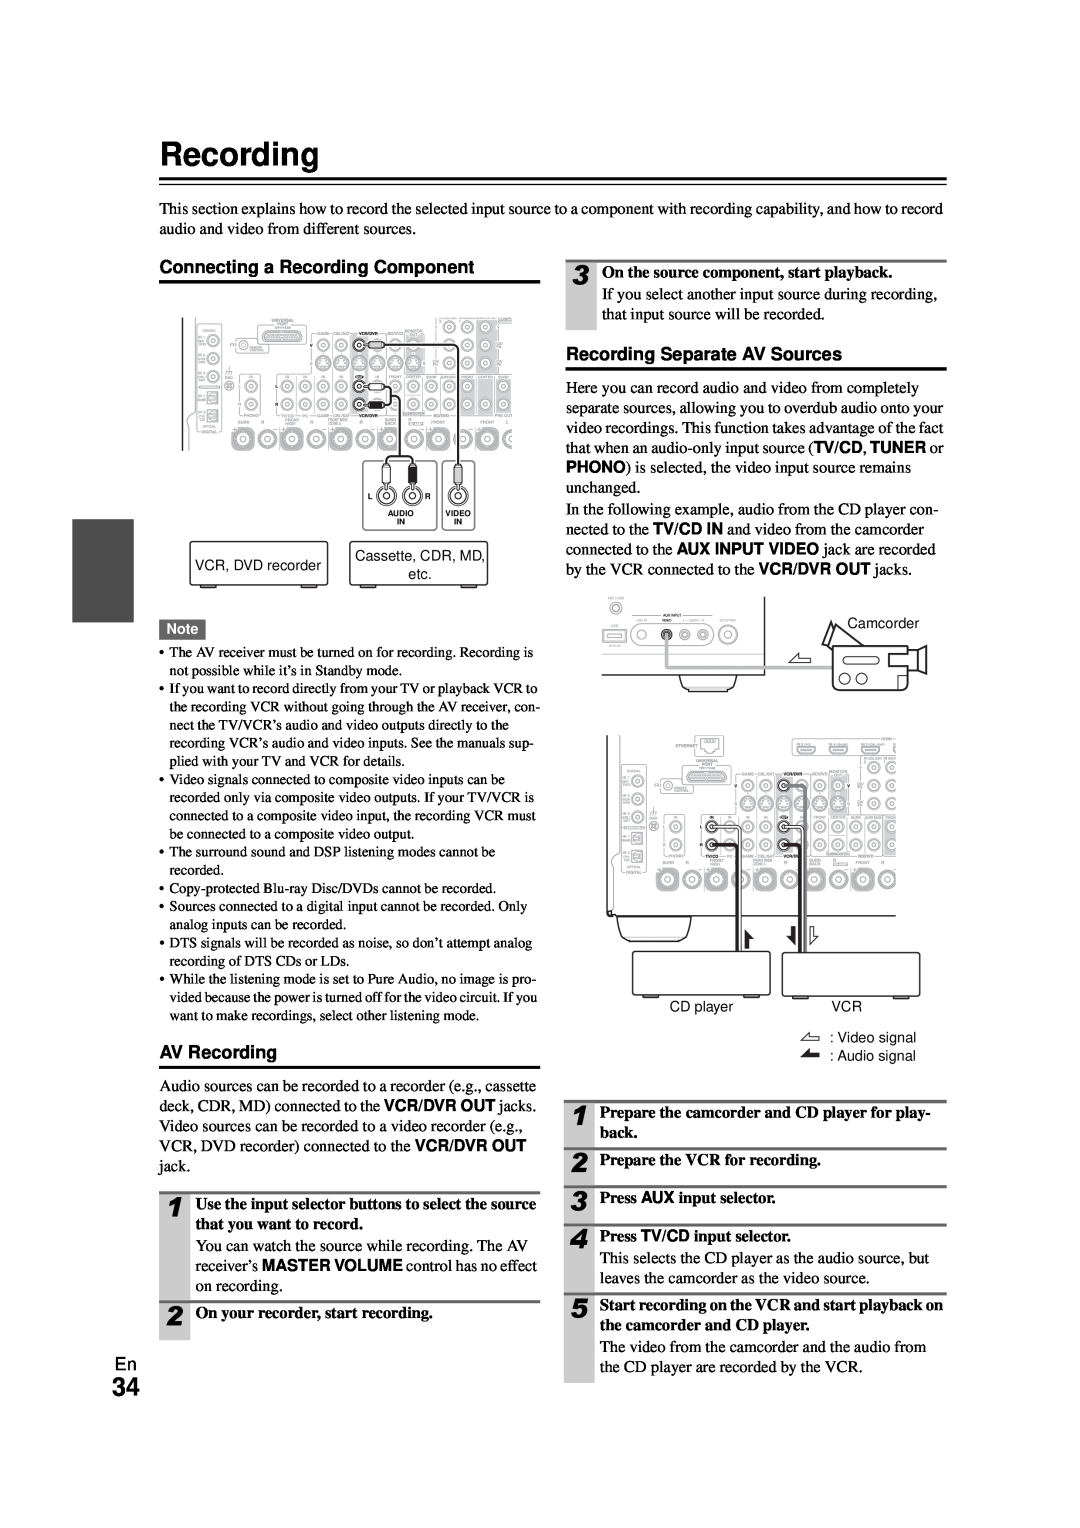 Onkyo HT-RC270 instruction manual Connecting a Recording Component, Recording Separate AV Sources, AV Recording 